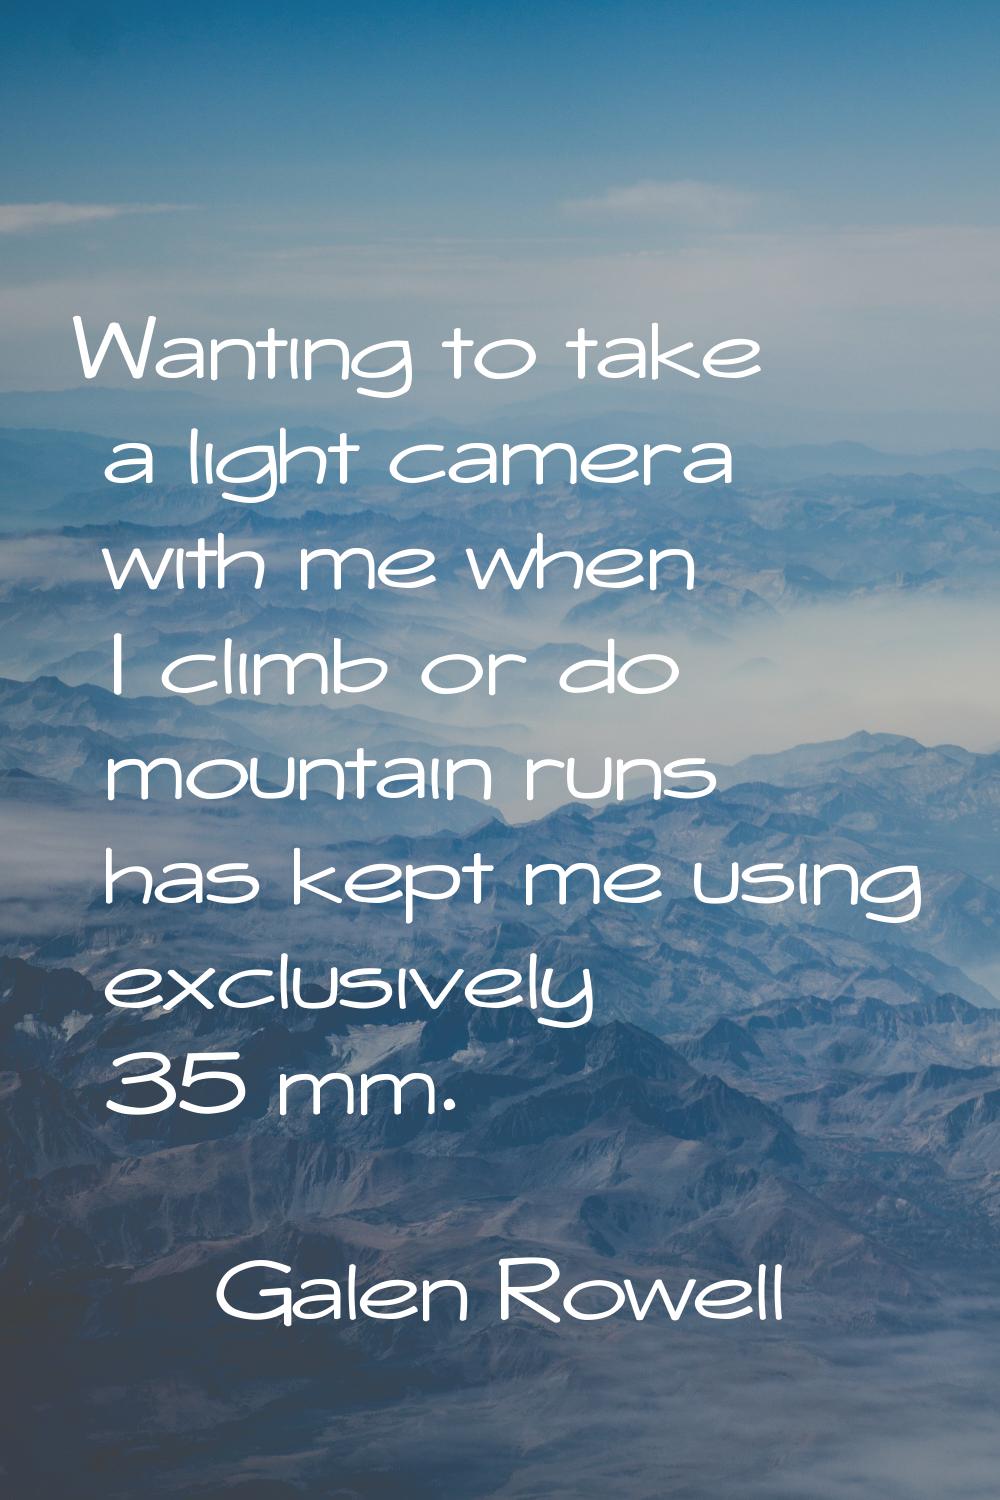 Wanting to take a light camera with me when I climb or do mountain runs has kept me using exclusive